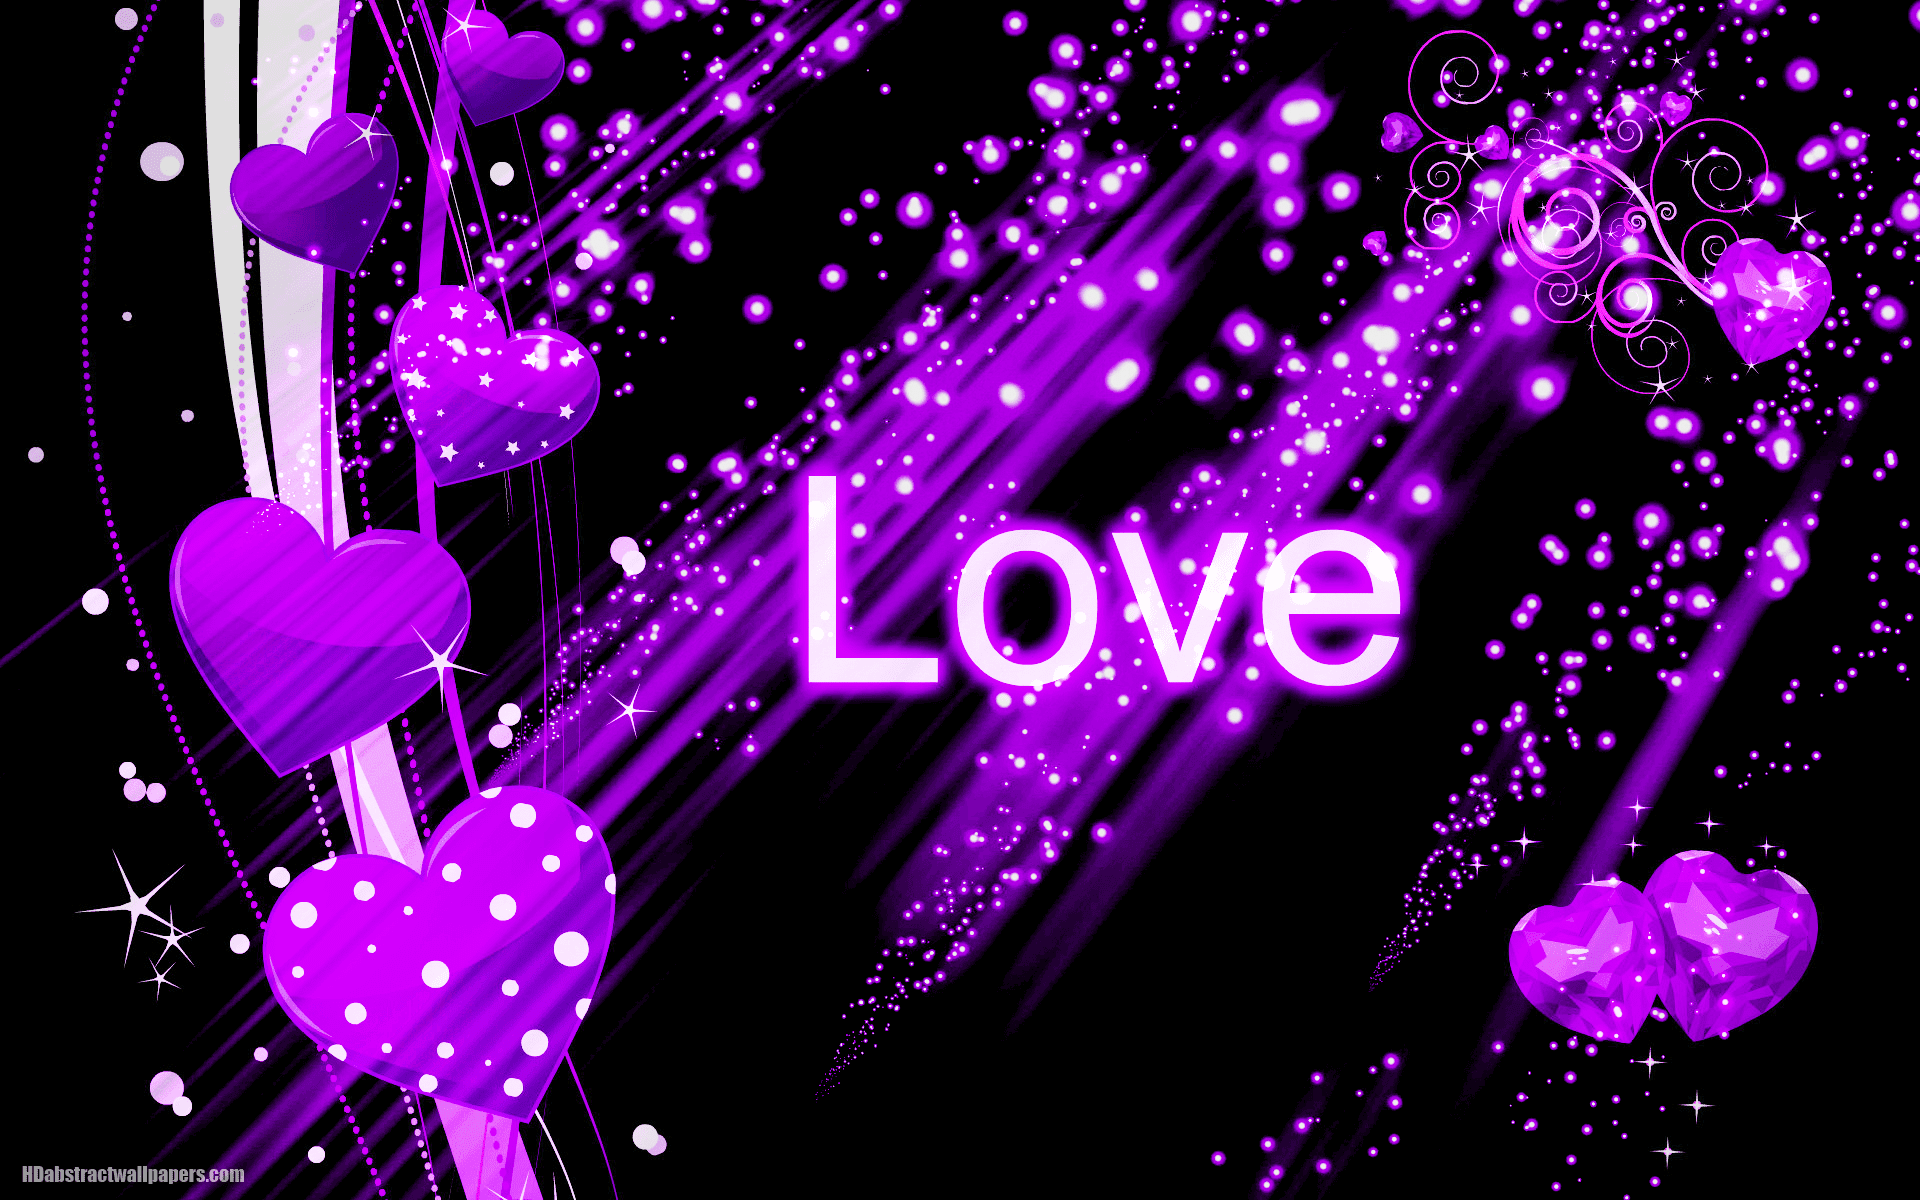 Black abstract wallpaper with purple love hearts. HD Abstract